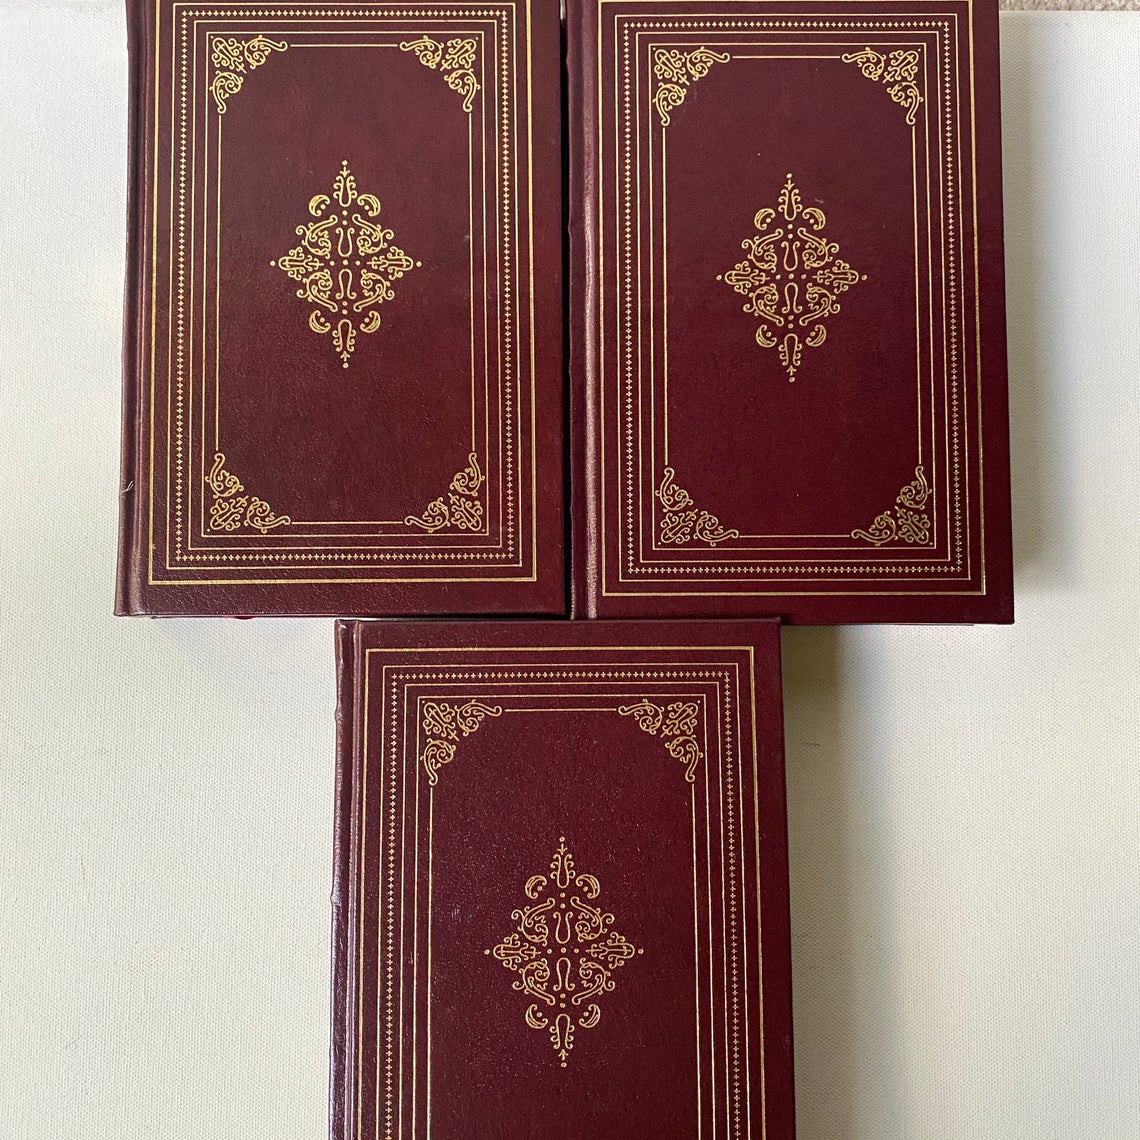 English Poetry in Three Volumes, Vintage Hardbound Books,The Harvard Classics, Keats, Fitzgerald, Whitman, Emerson and more